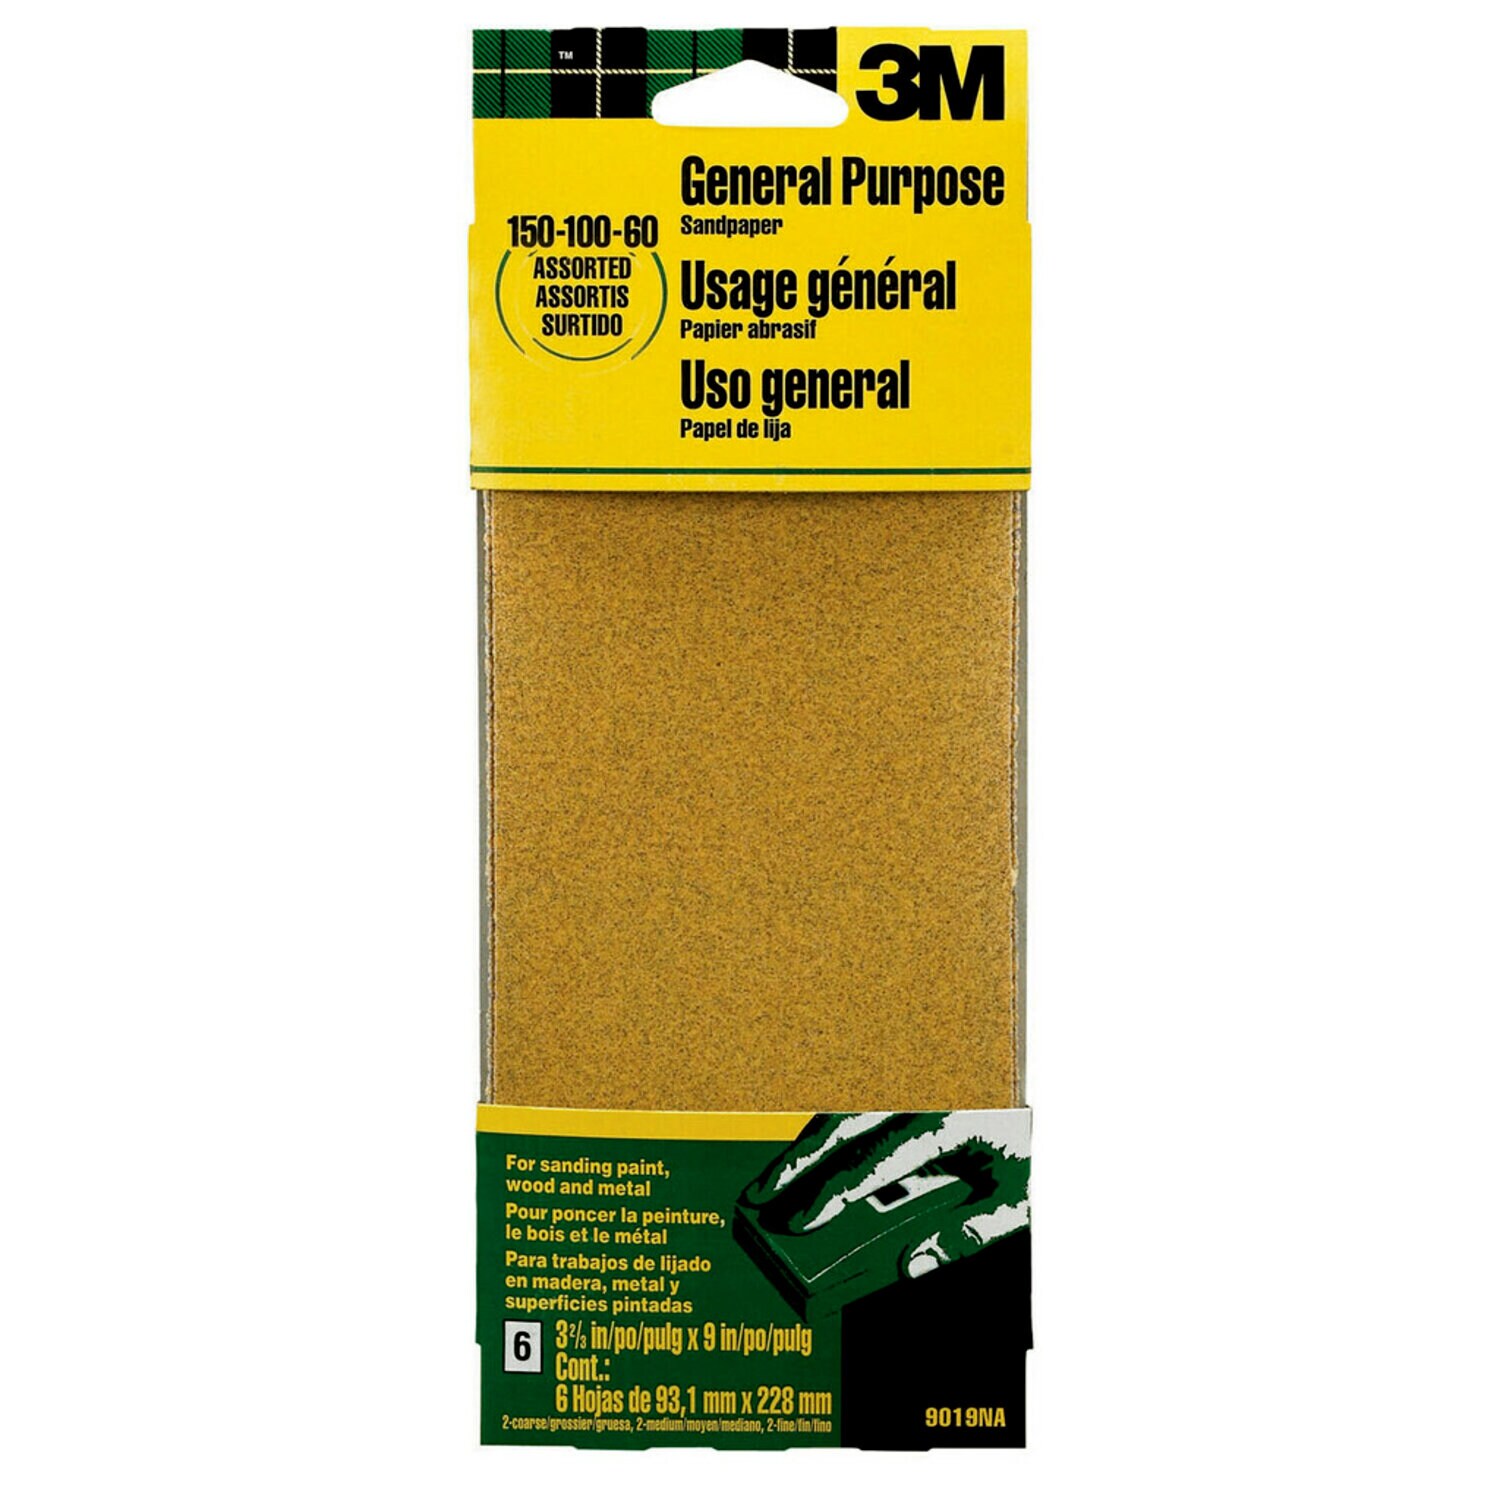 7000126178 - 3M Aluminum Oxide Sandpaper 9019NA, 3-2/3 in x 9 in, Assorted grit, 6
Sheet, Open Stock